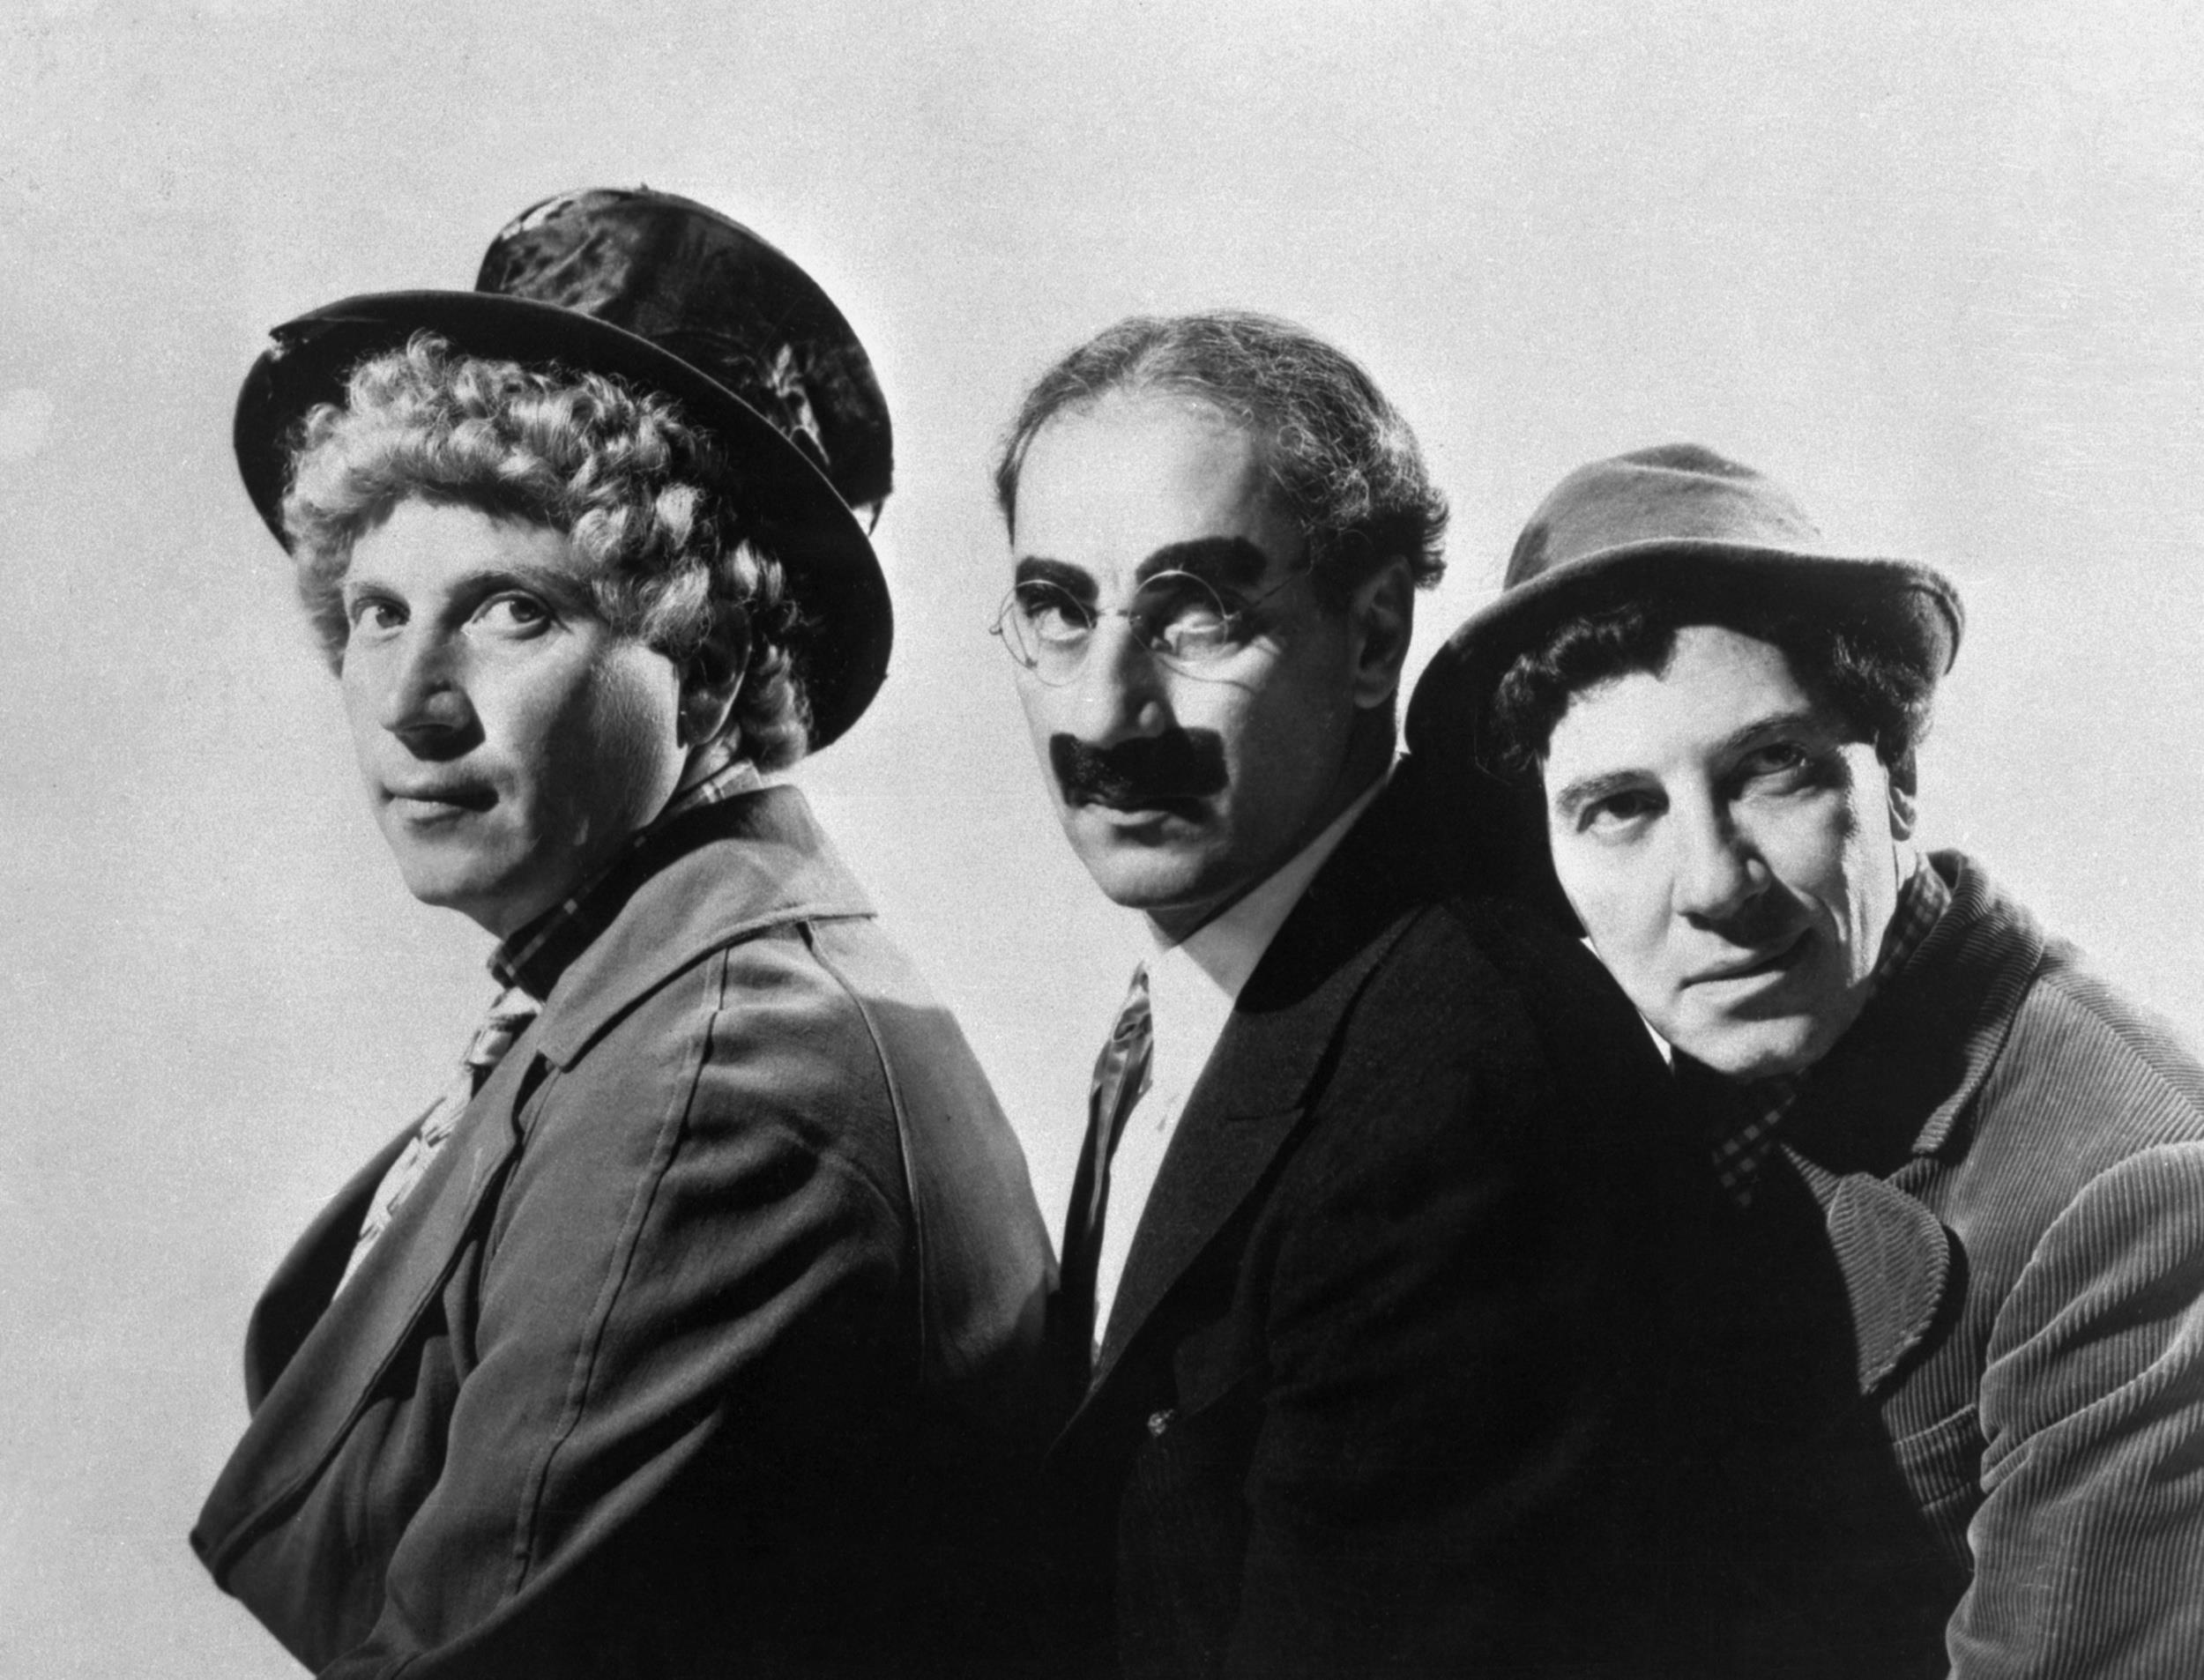 <p>The famed comedic brothers — Groucho, Harpo, Chico, Gummo, and Zeppo — enjoyed major success on stage and screen. Classics like <em>Duck Soup </em>(1933) and <em>A Night at the Opera </em>(1935) remain timeless comedy classics. Groucho was the most famous of the brothers, breaking off to shine on his own. Gummo's grandson <a href="https://badnewsbears.fandom.com/wiki/Jimmy_Feldman" rel="noopener noreferrer">Brett Marx</a> starred in the popular <em>Bad News Bears </em>movies of the 1970s.</p><p><a href='https://www.msn.com/en-us/community/channel/vid-cj9pqbr0vn9in2b6ddcd8sfgpfq6x6utp44fssrv6mc2gtybw0us'>Follow us on MSN to see more of our exclusive entertainment content.</a></p>